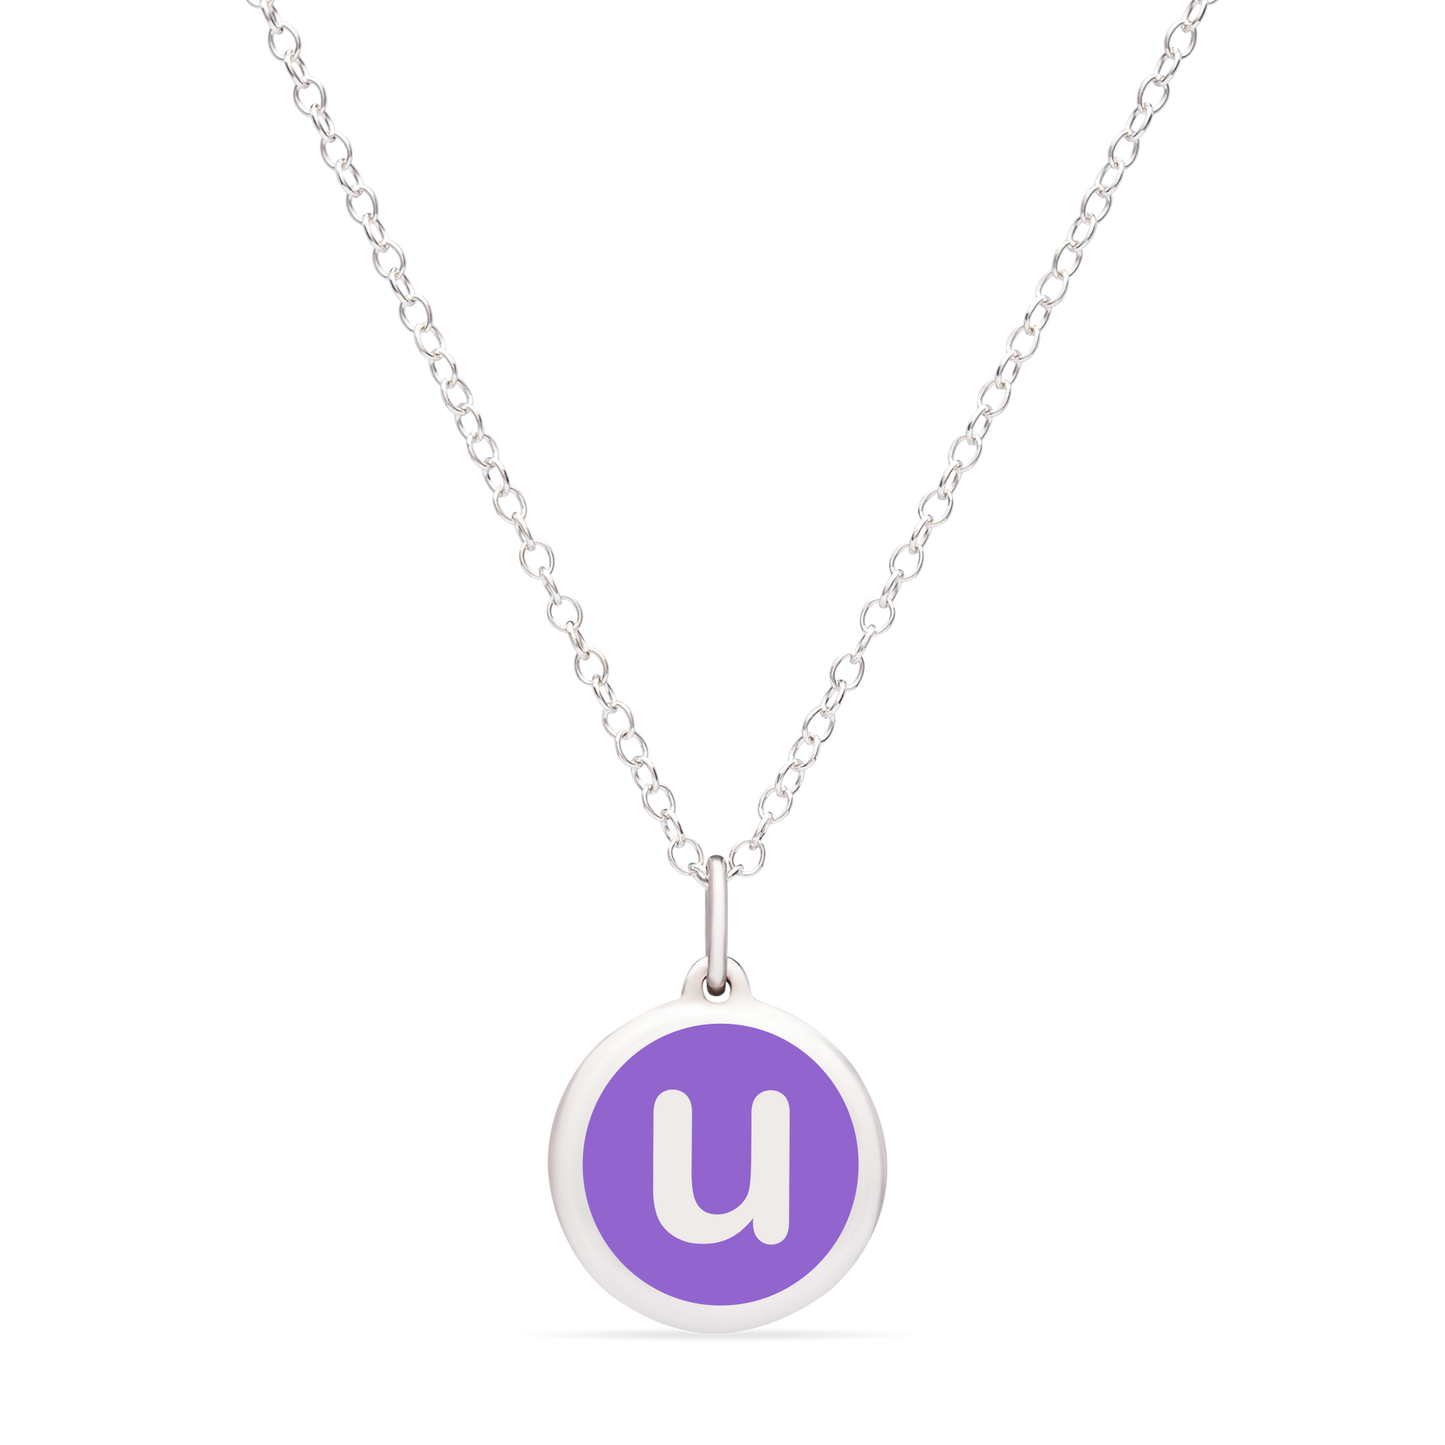 MINI INITIAL 'u' CHARM sterling silver with rhodium plate